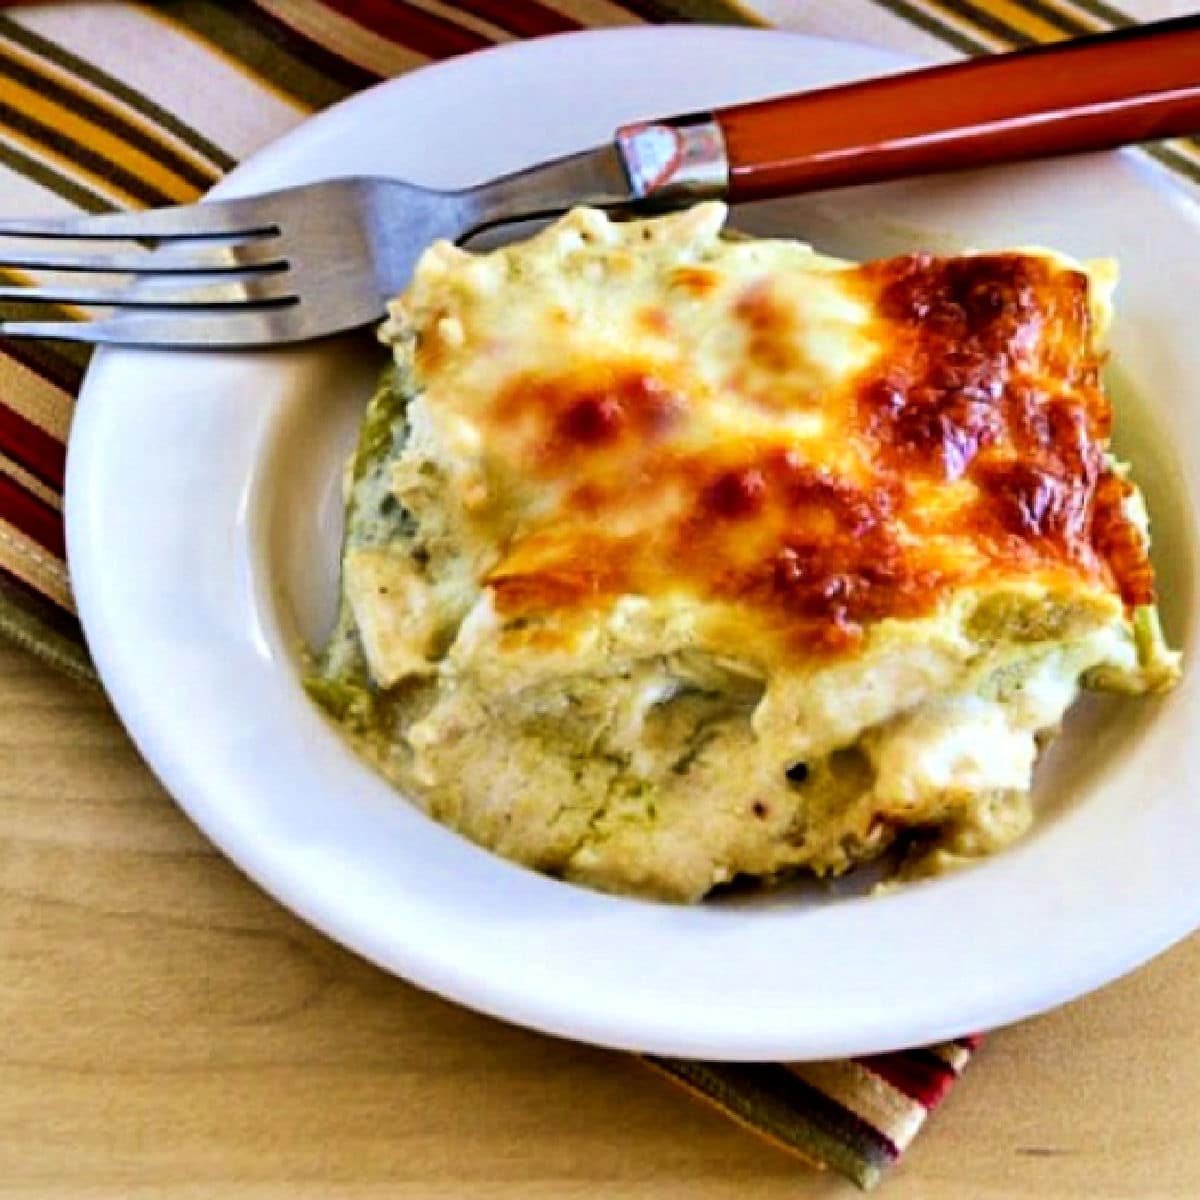 Square image of Green Chile and Chicken Mock Enchilada Casserole with one serving on plate with fork.